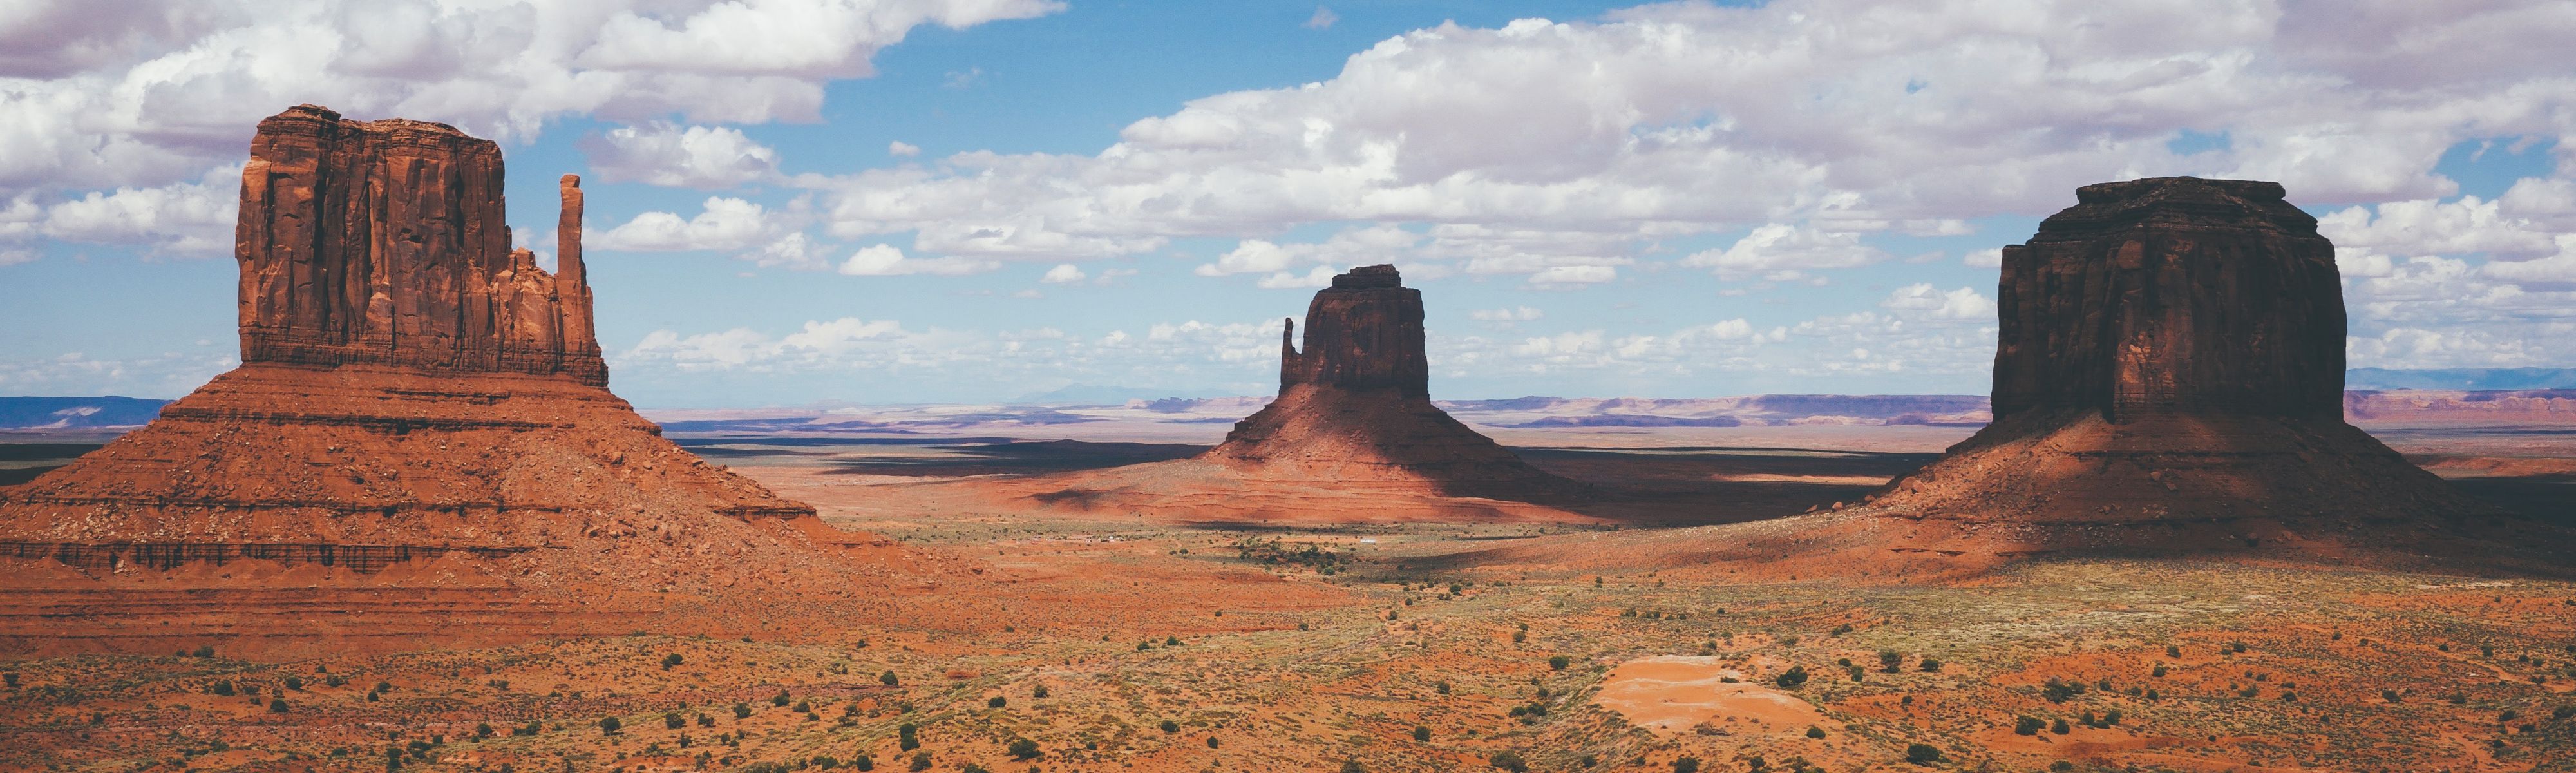 towering sandstone buttes in monument valley in arizona